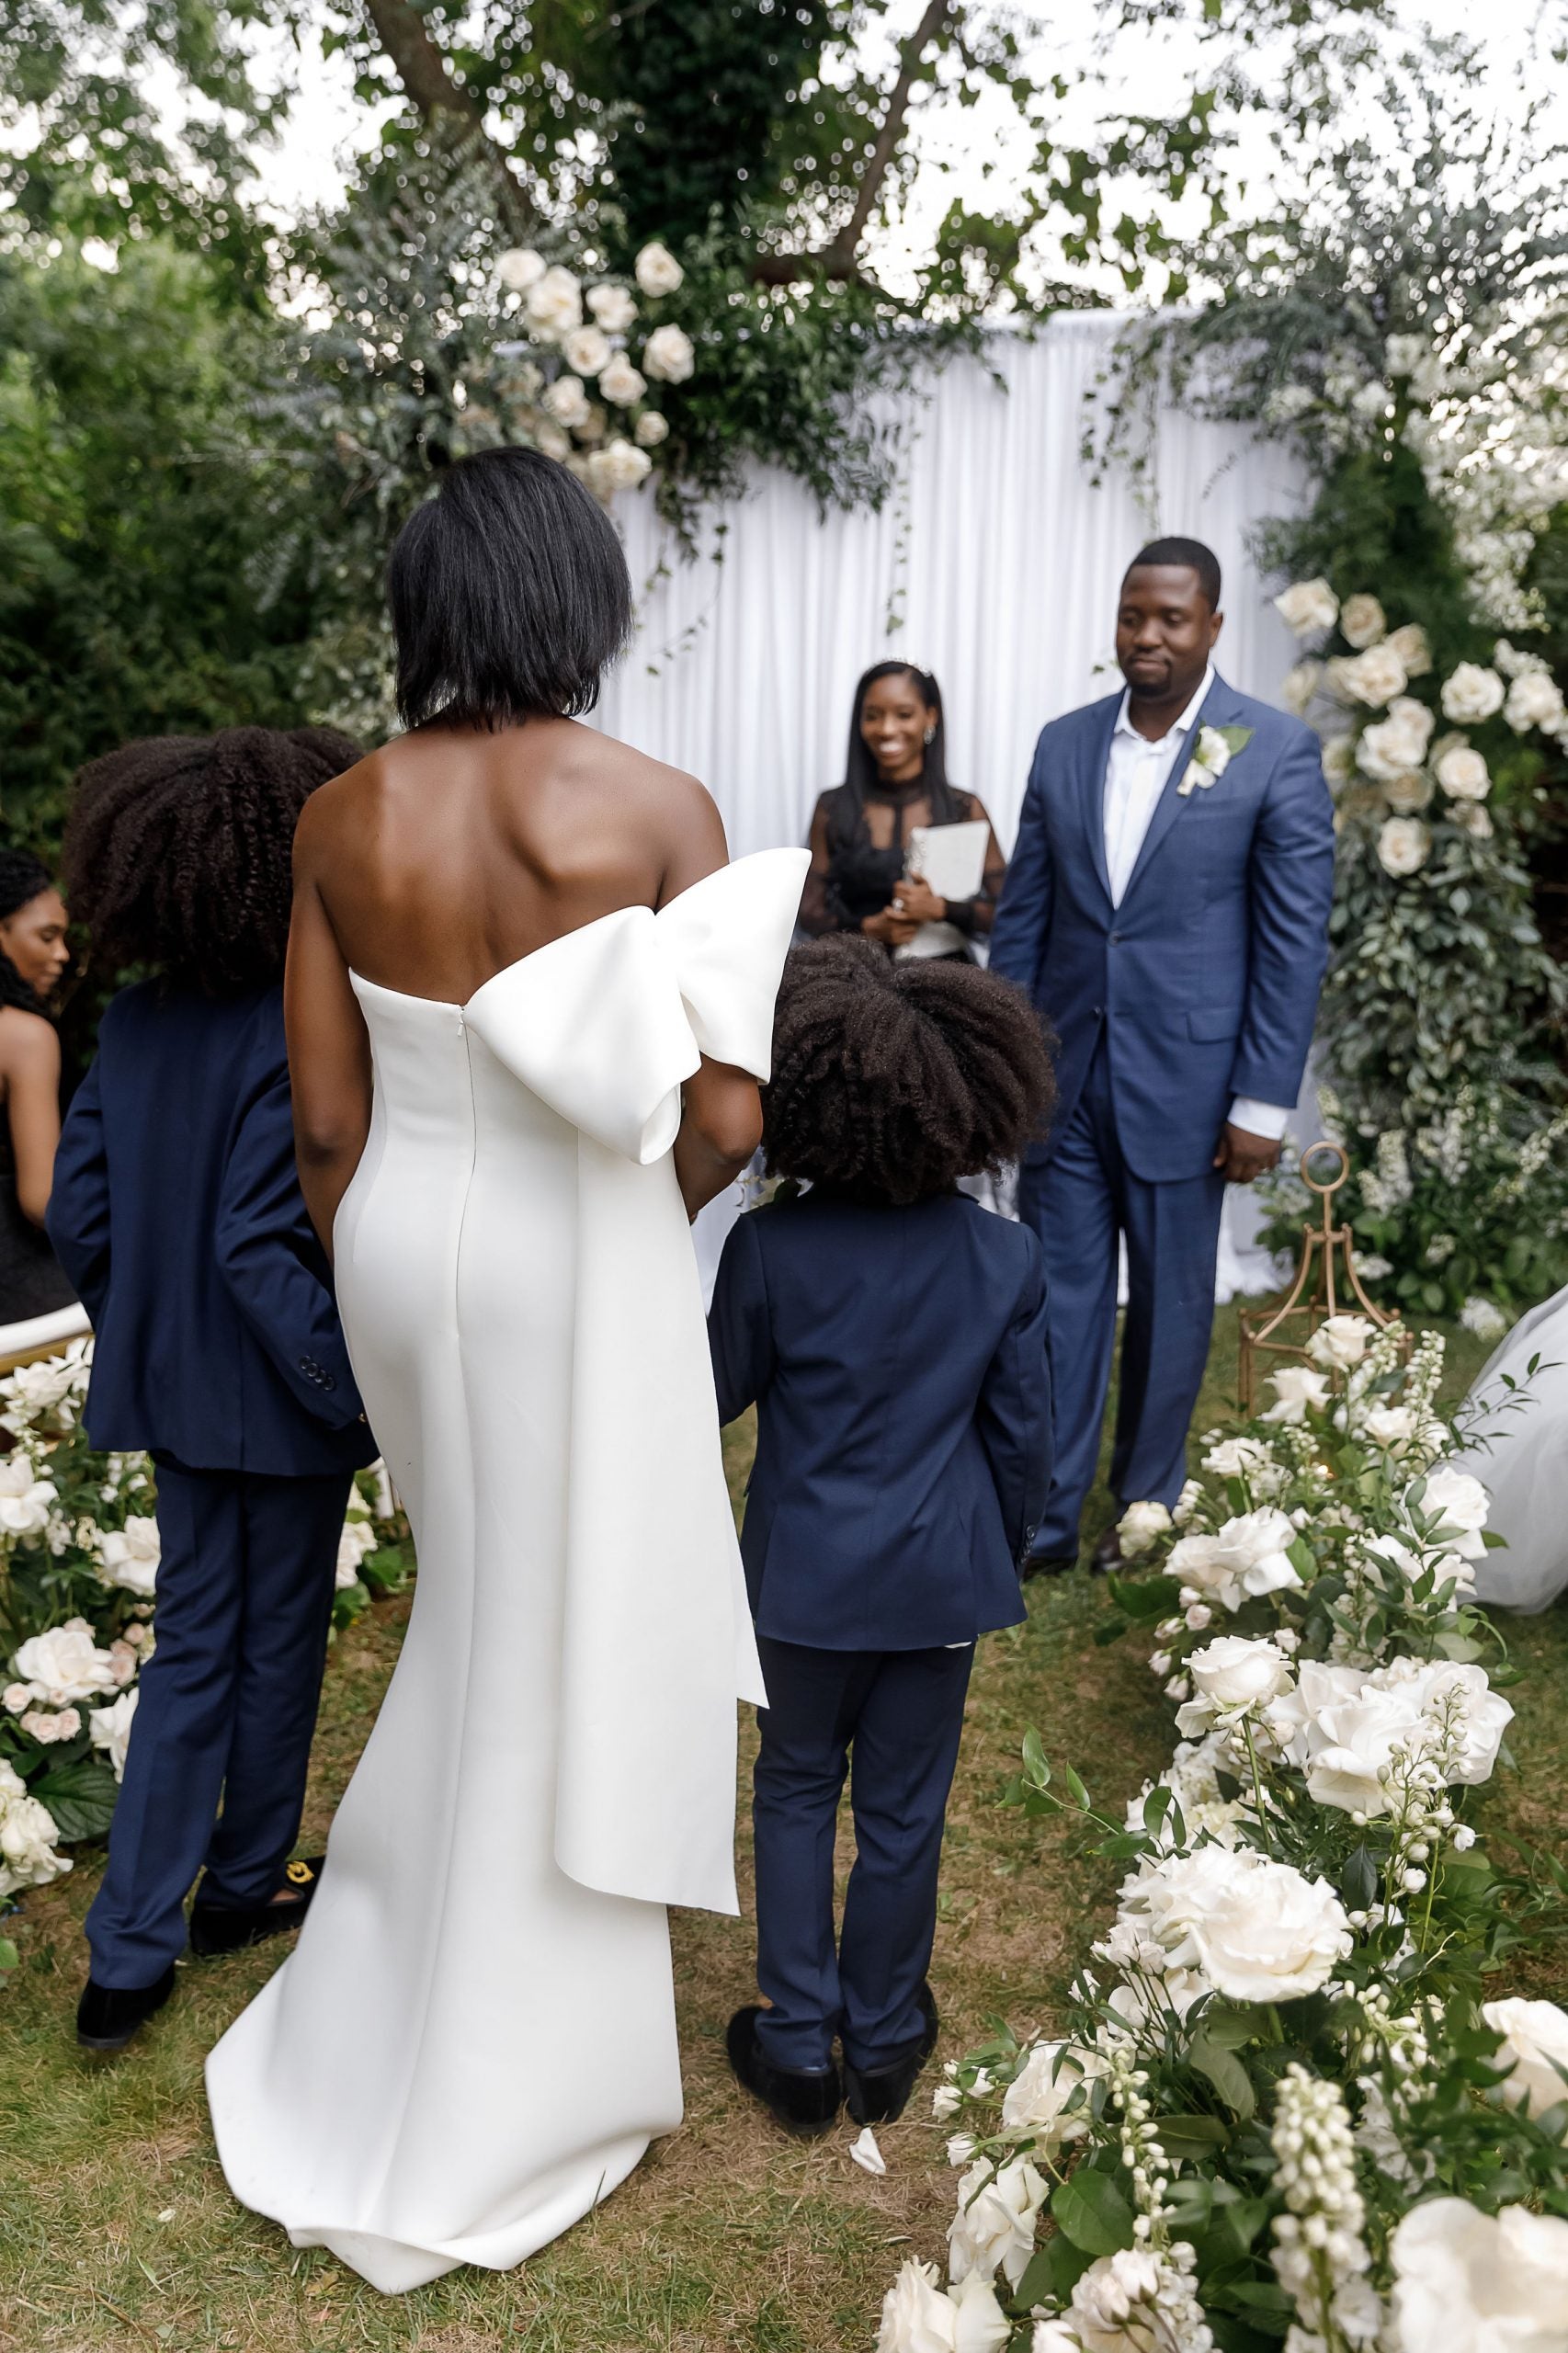 Bridal Bliss: Mills And Johanne's Vow Renewal Was A Family Affair